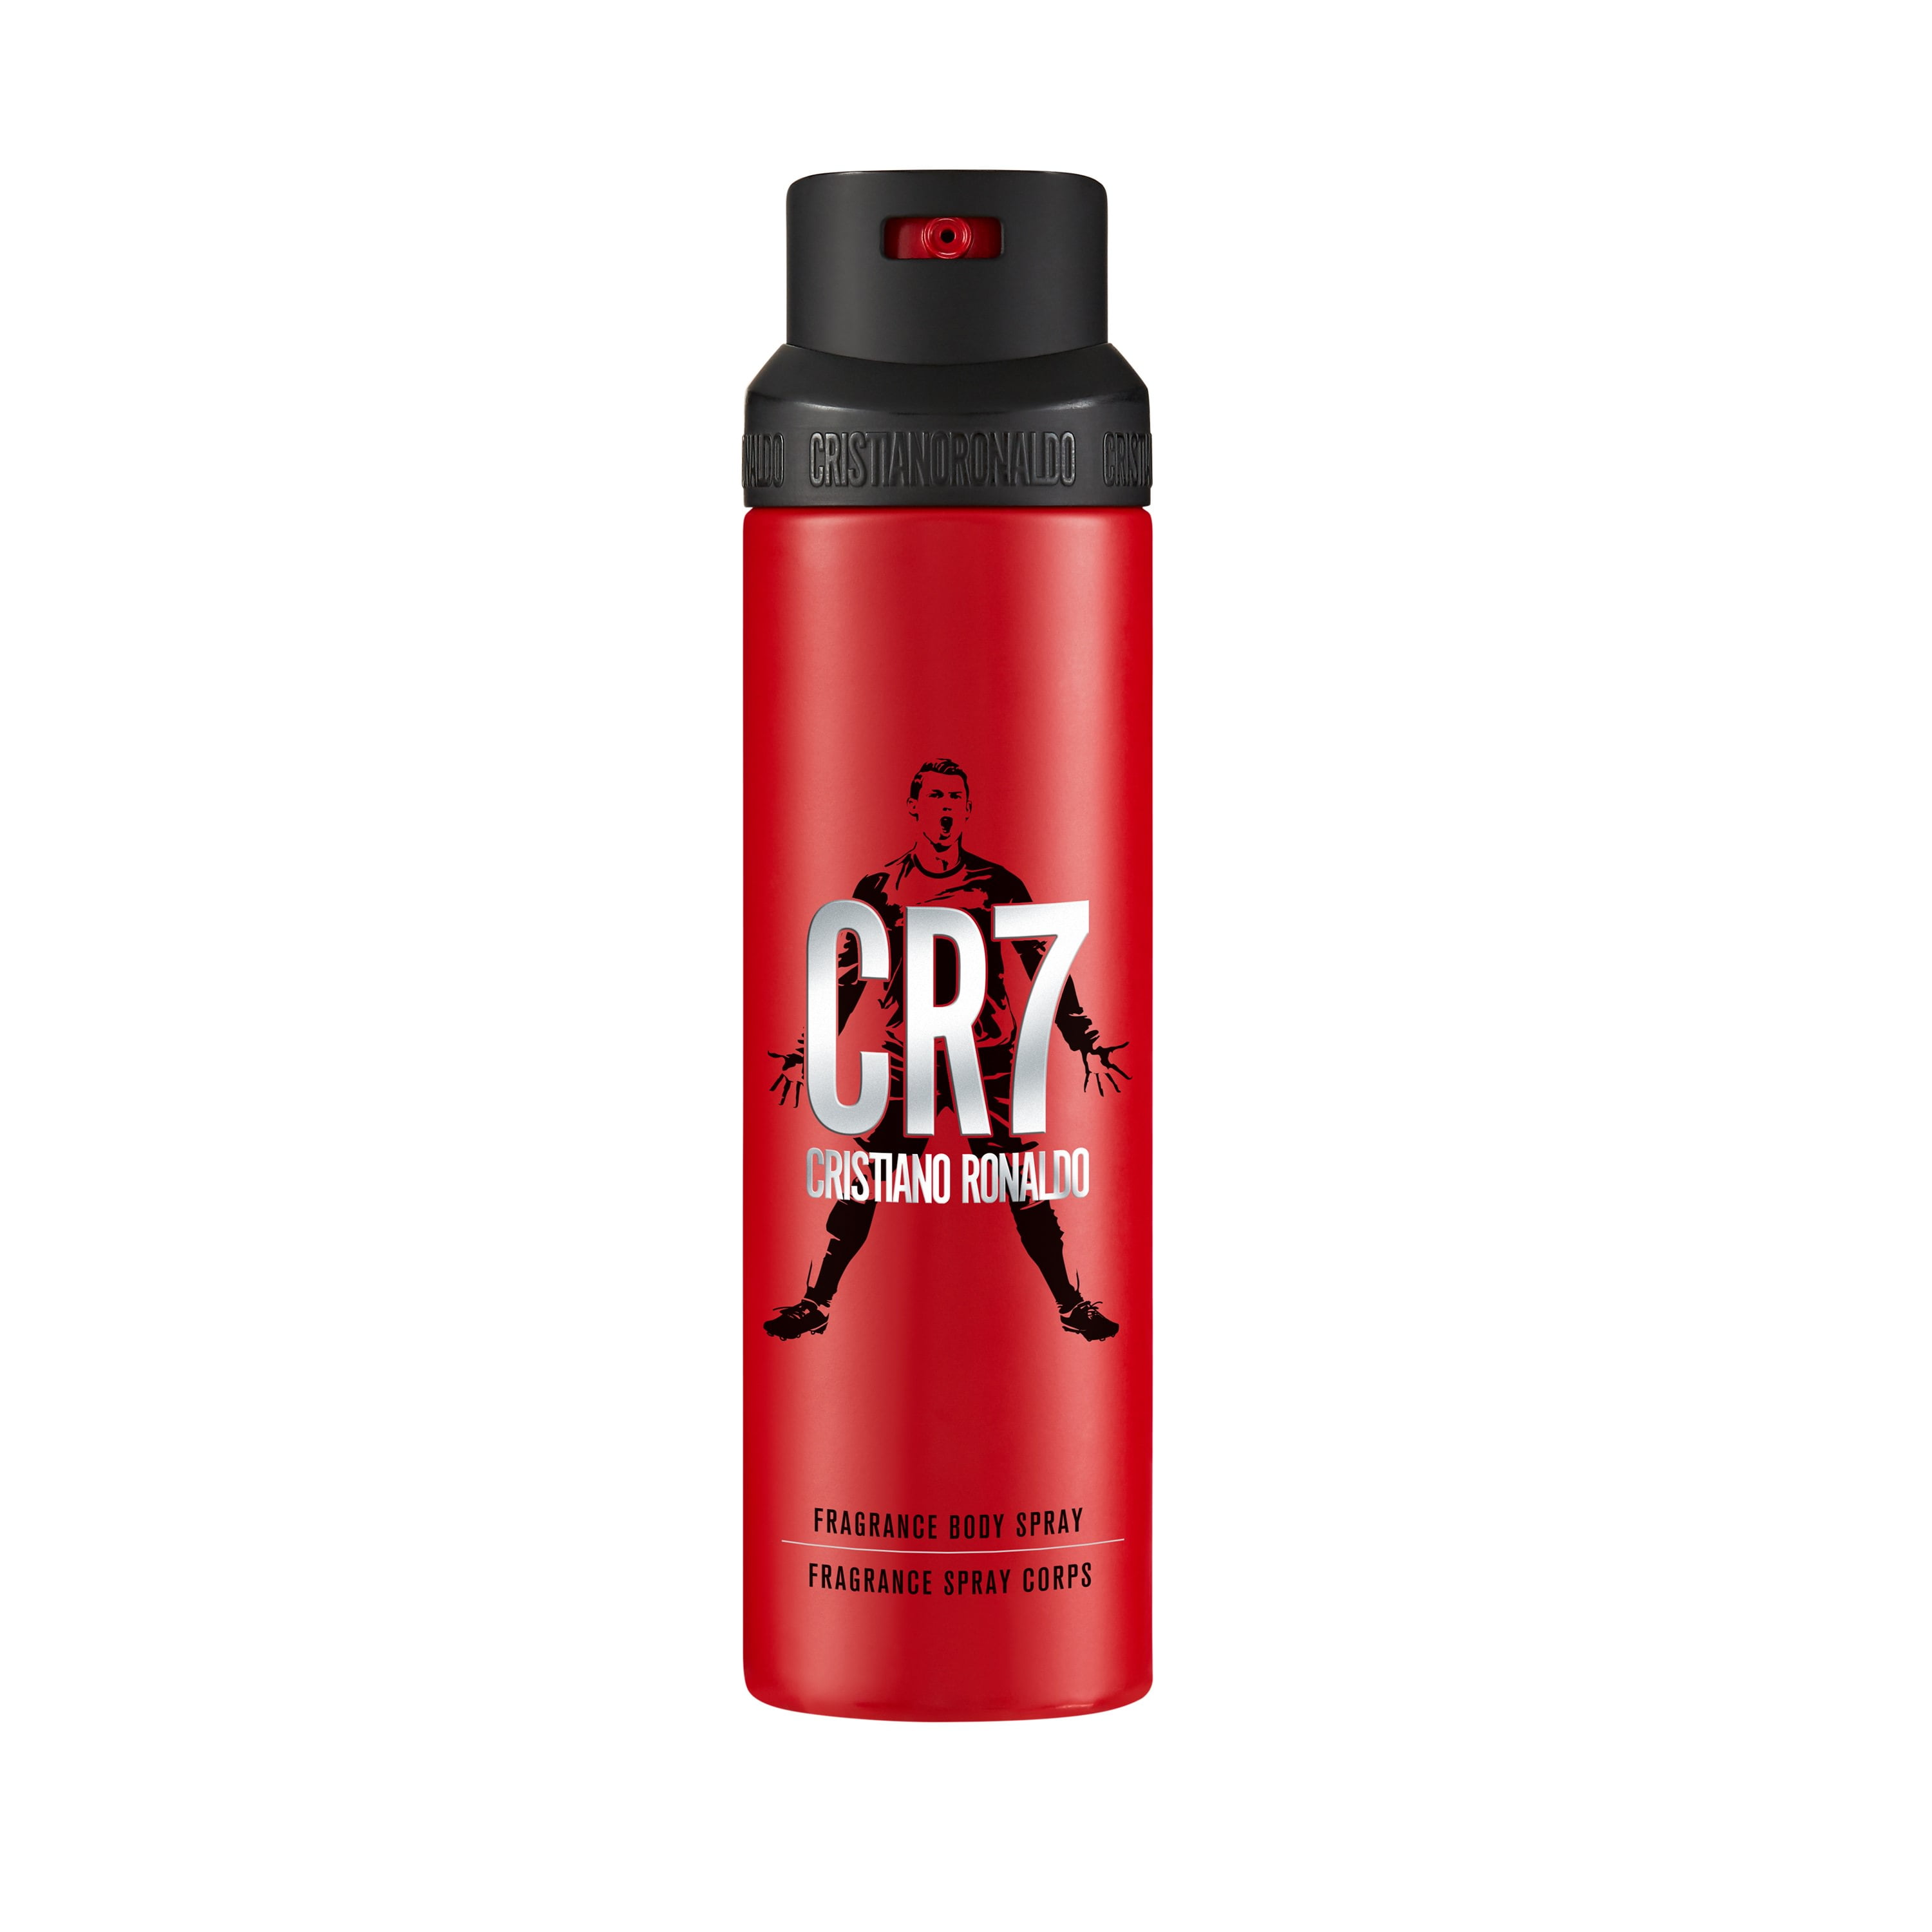 15 Minute Cr7 pre workout price for ABS